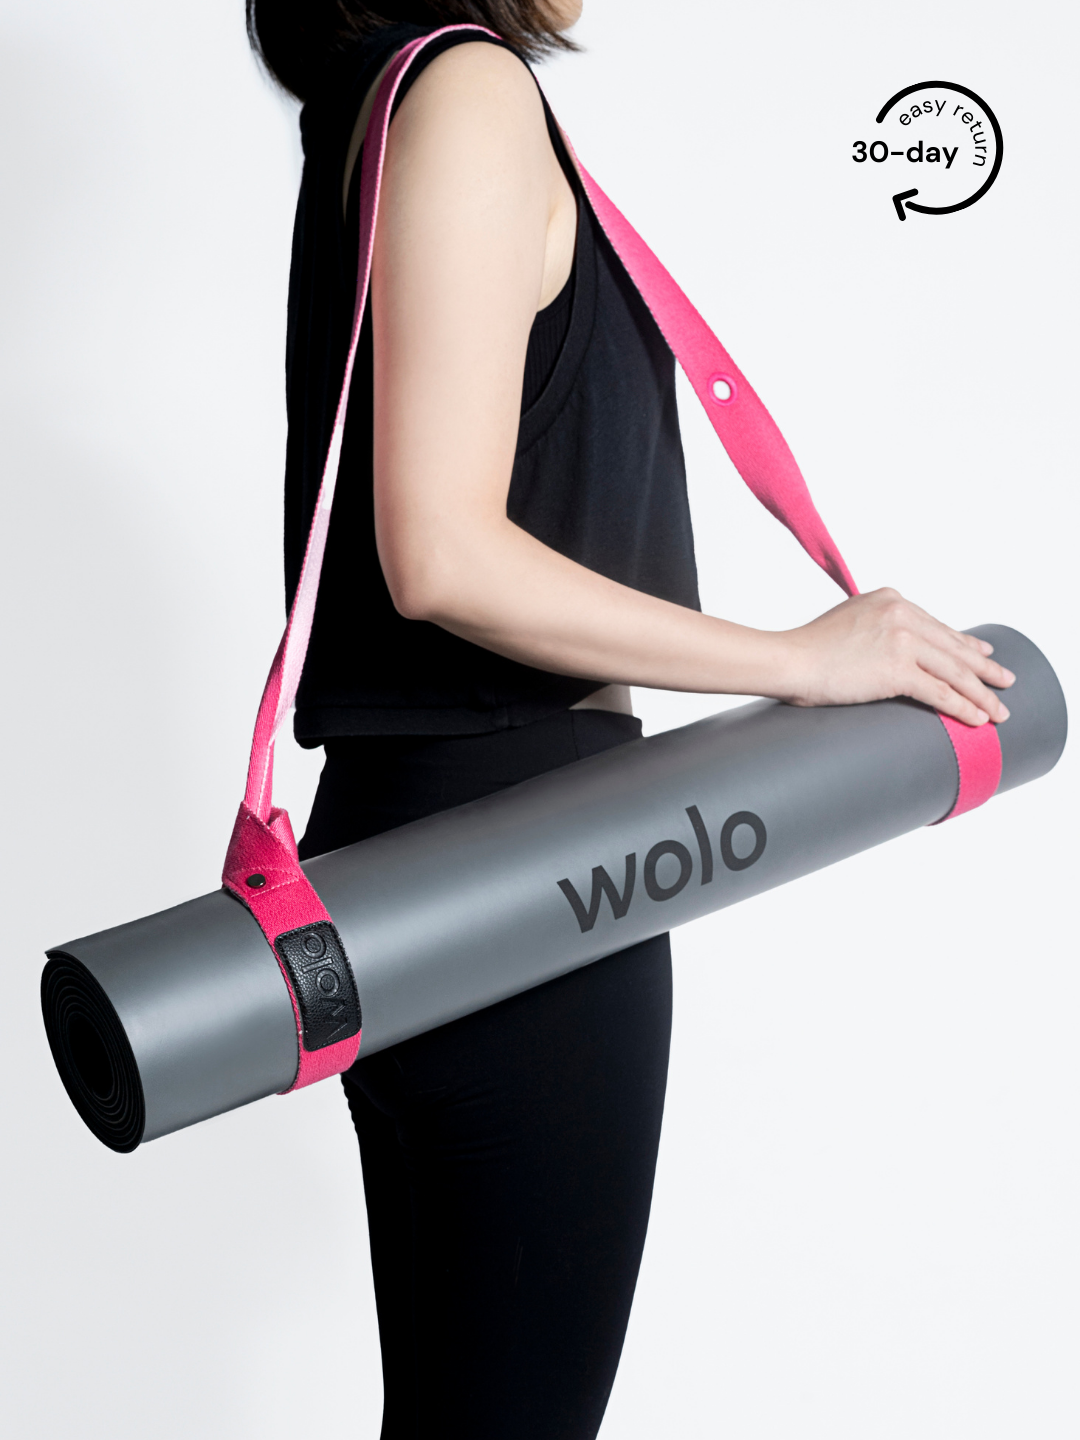 Lady carry a grey yoga mat with a pink mat carry strap